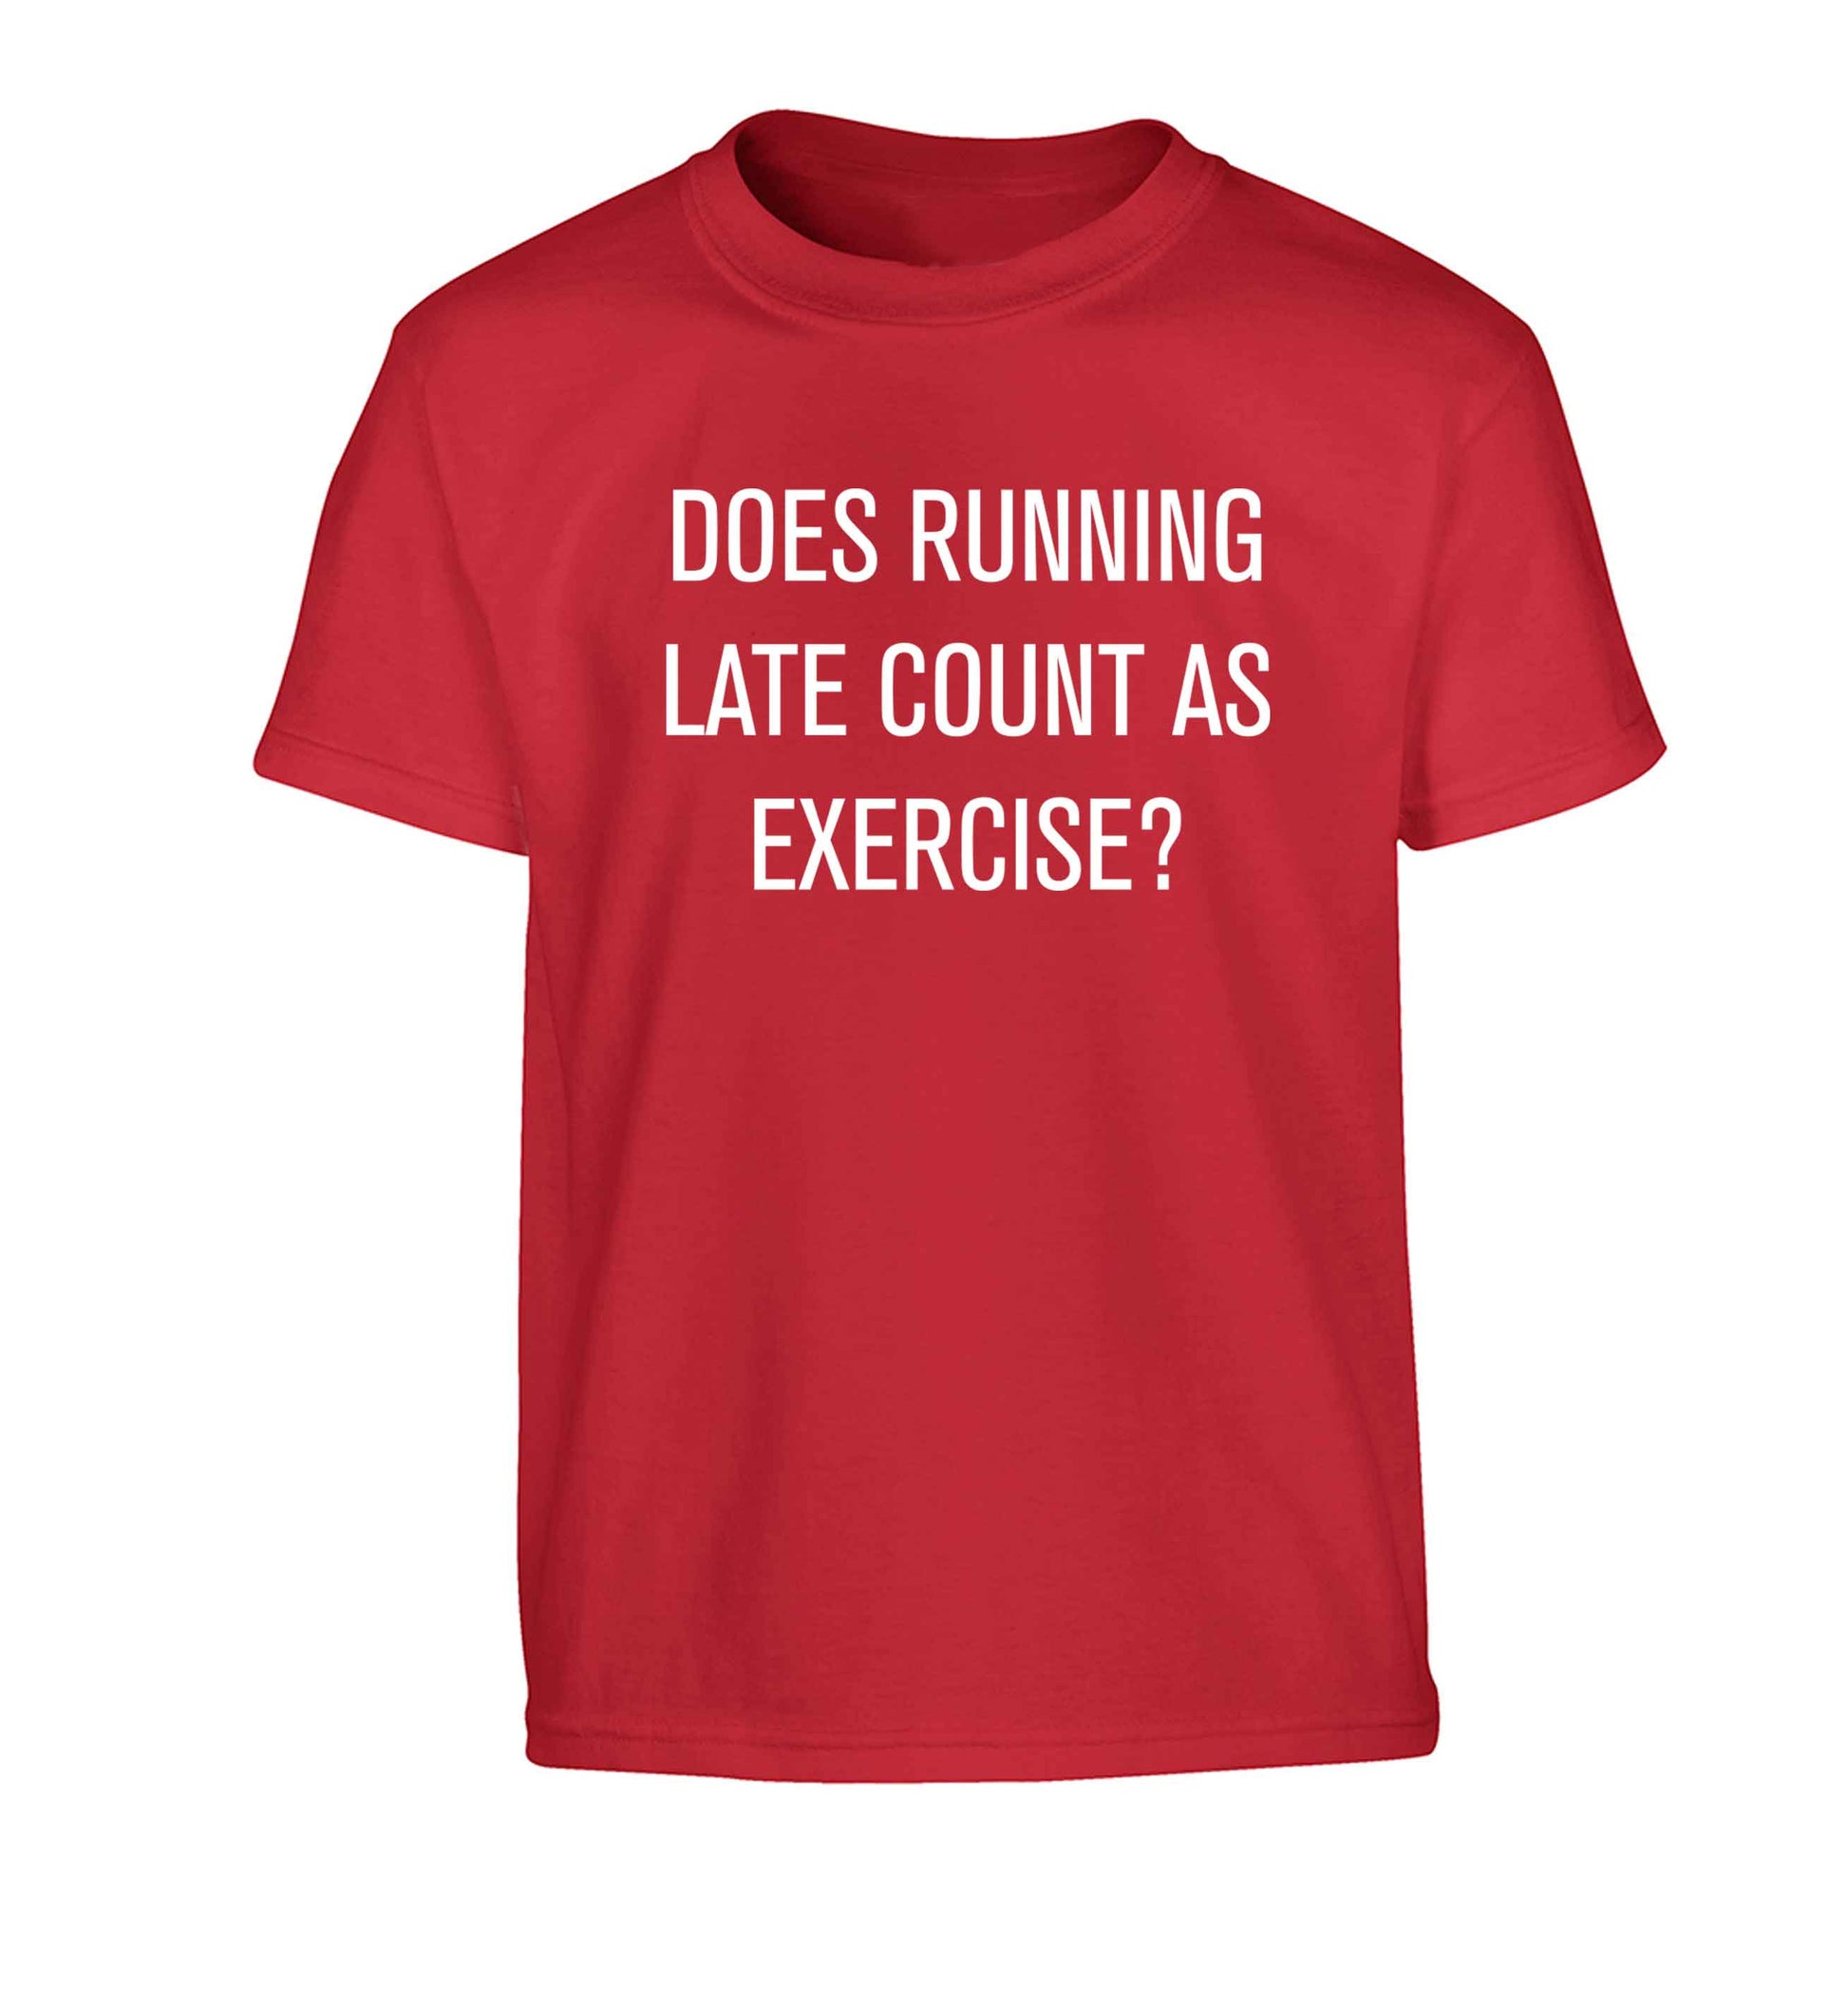 Does running late count as exercise? Children's red Tshirt 12-13 Years